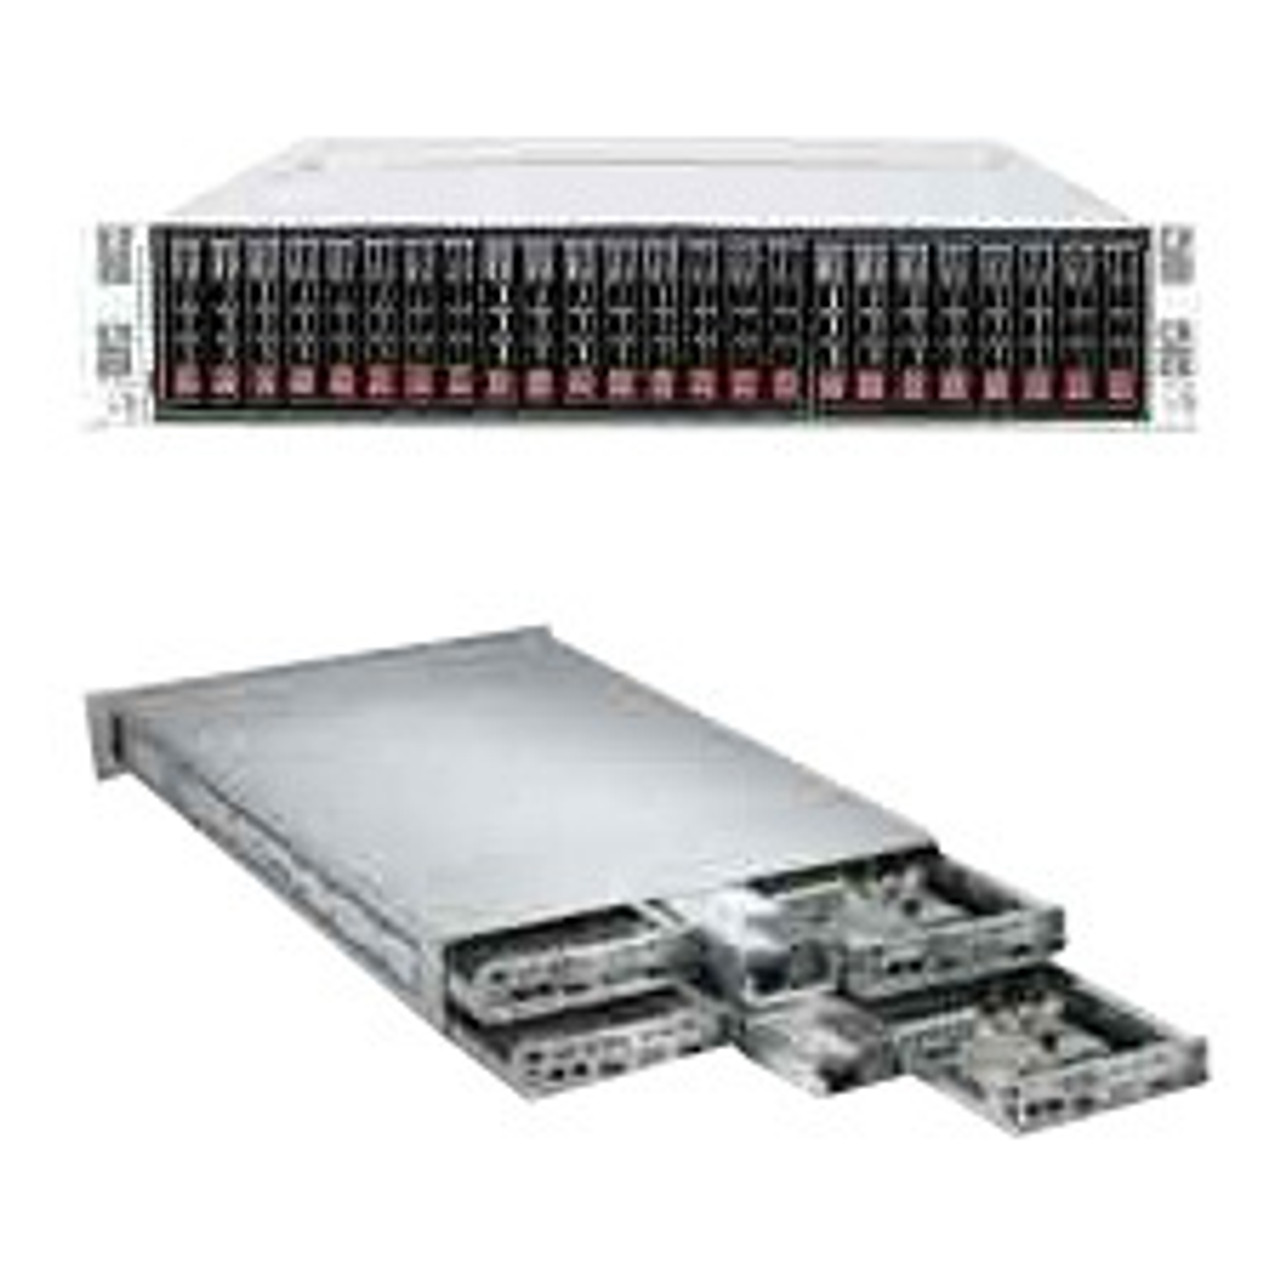 Supermicro AS-2122TG-HTRF